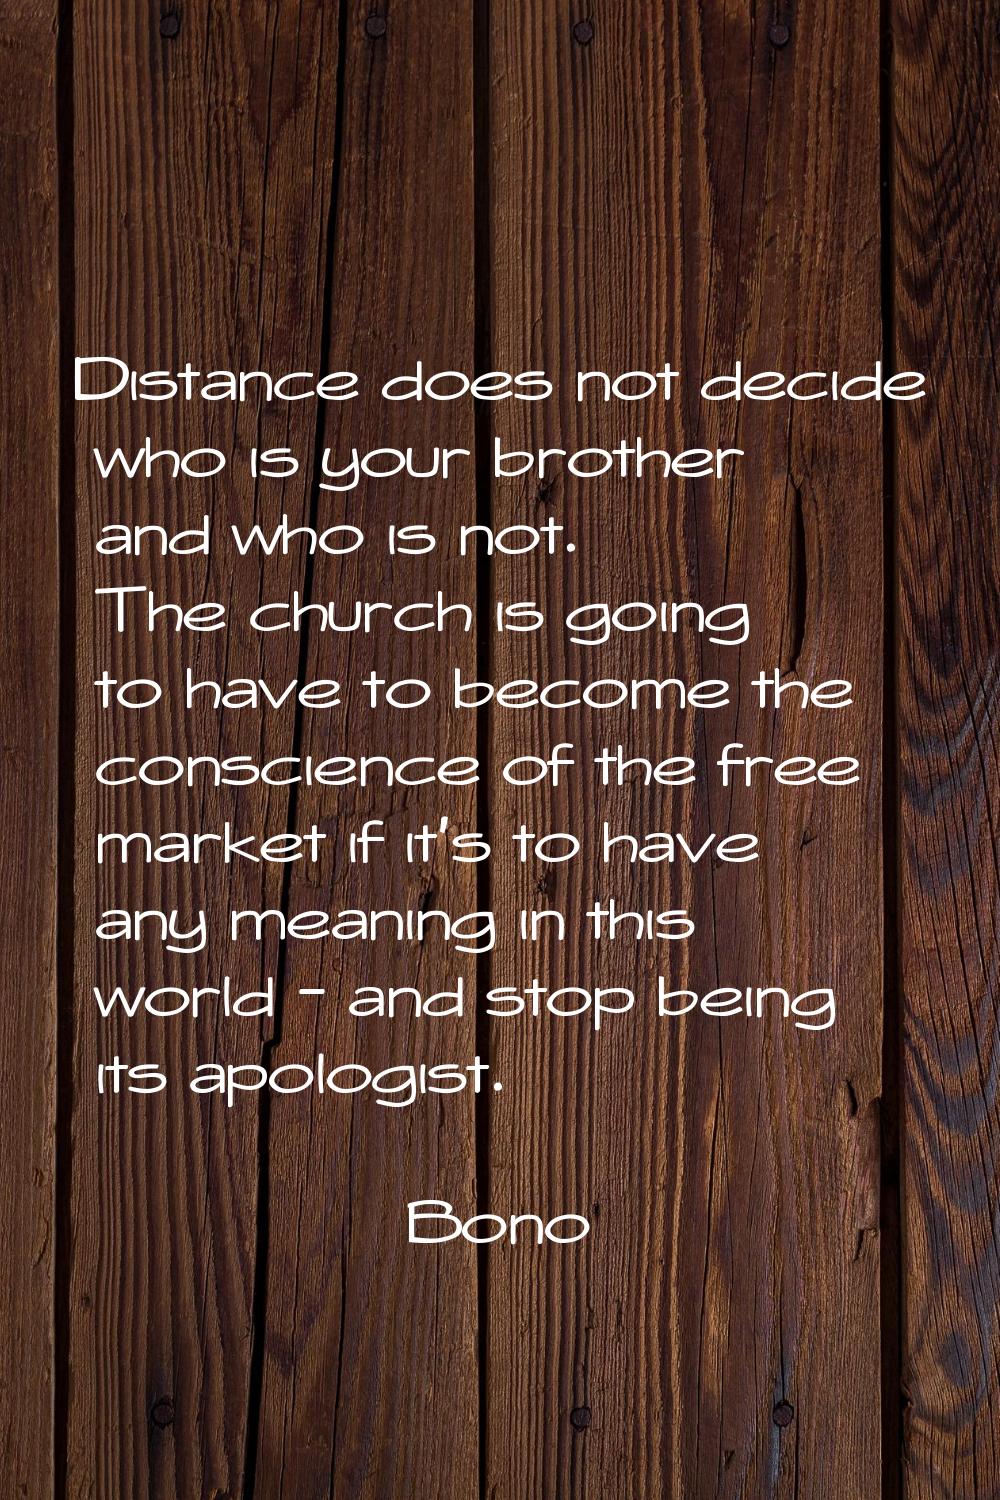 Distance does not decide who is your brother and who is not. The church is going to have to become 